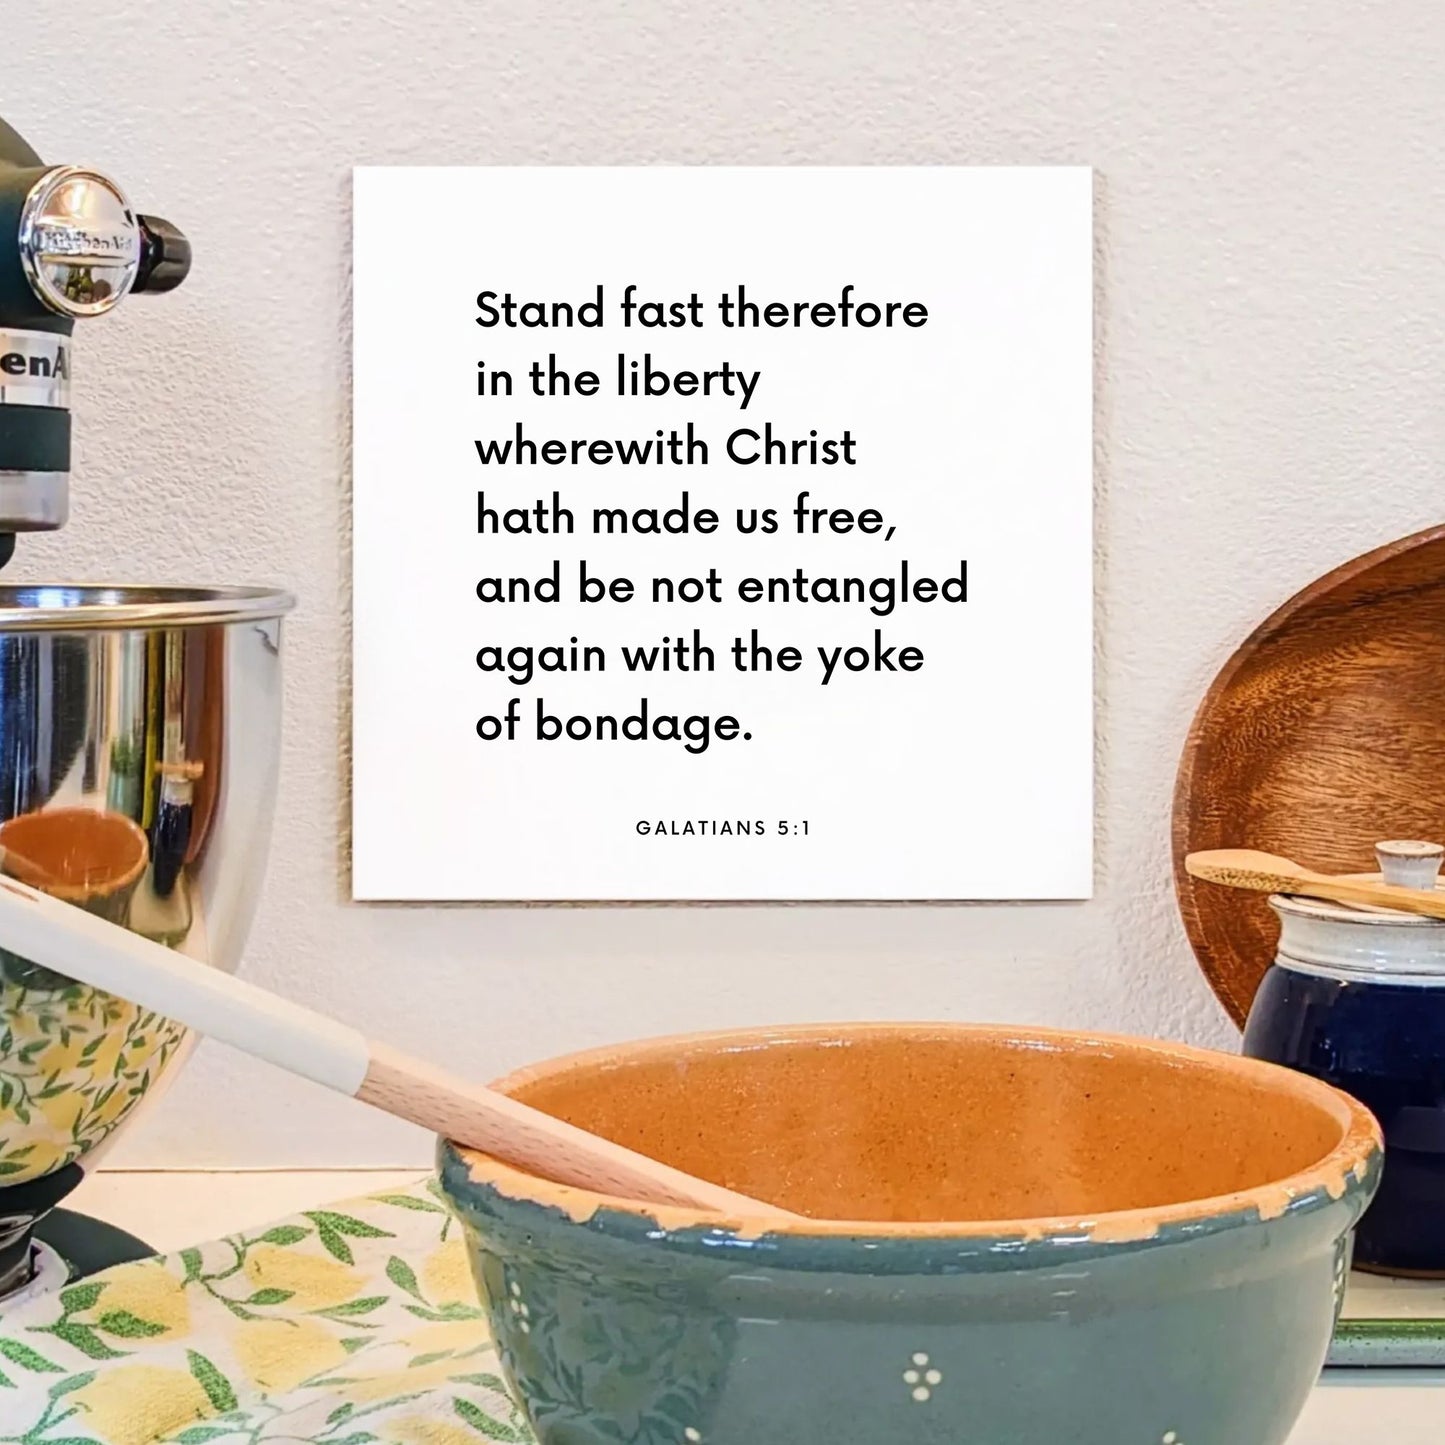 Kitchen mouting of the scripture tile for Galatians 5:1 - "Stand fast in the liberty wherewith Christ hath made us free"